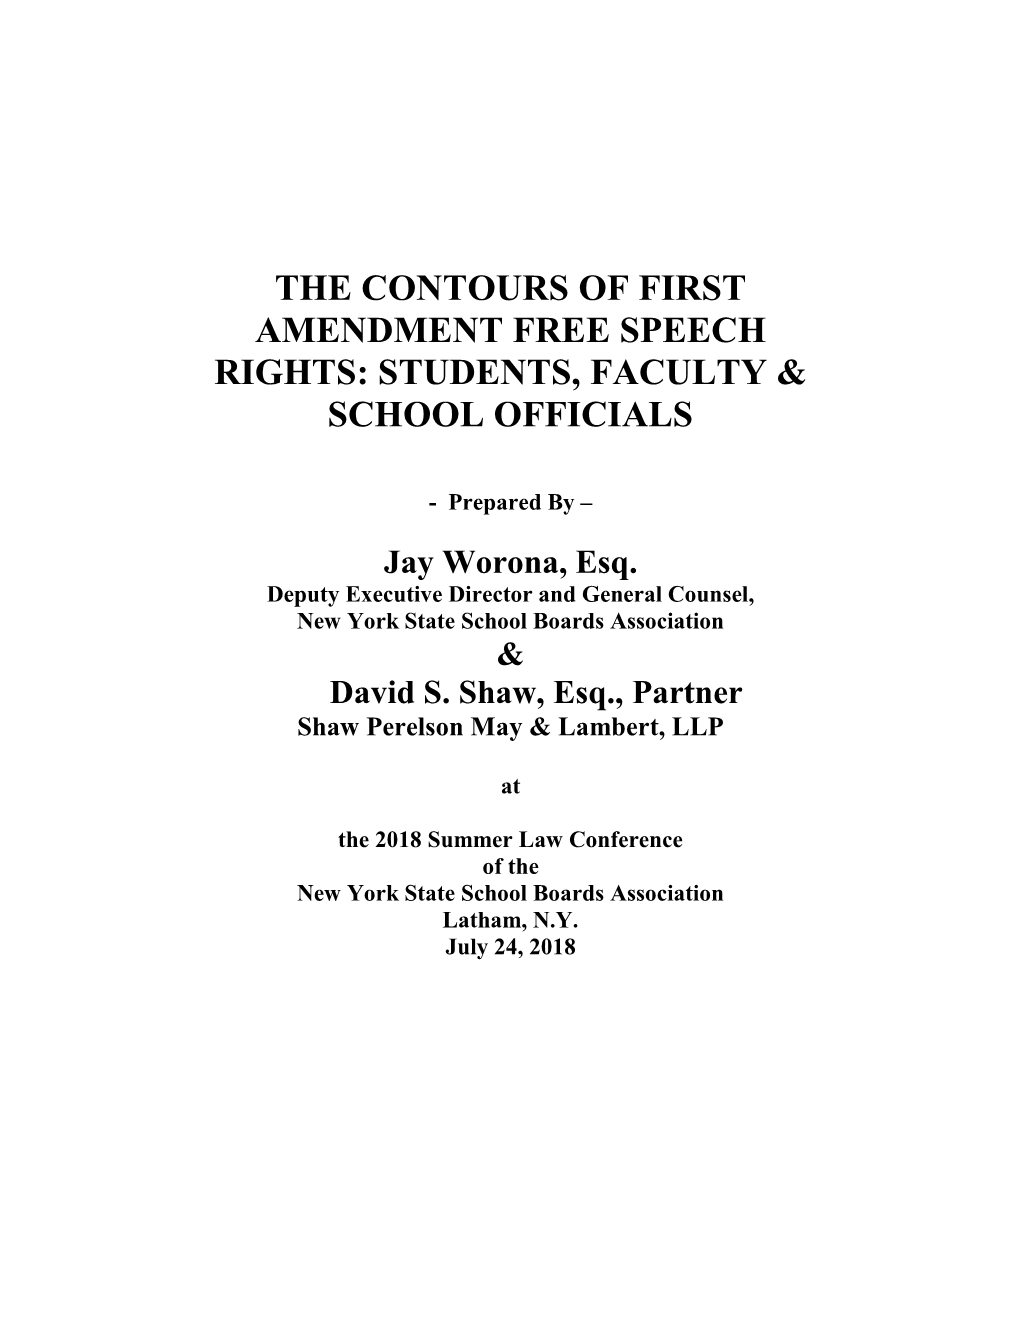 The Contours of First Amendment Free Speech Rights: Students, Faculty & School Officials